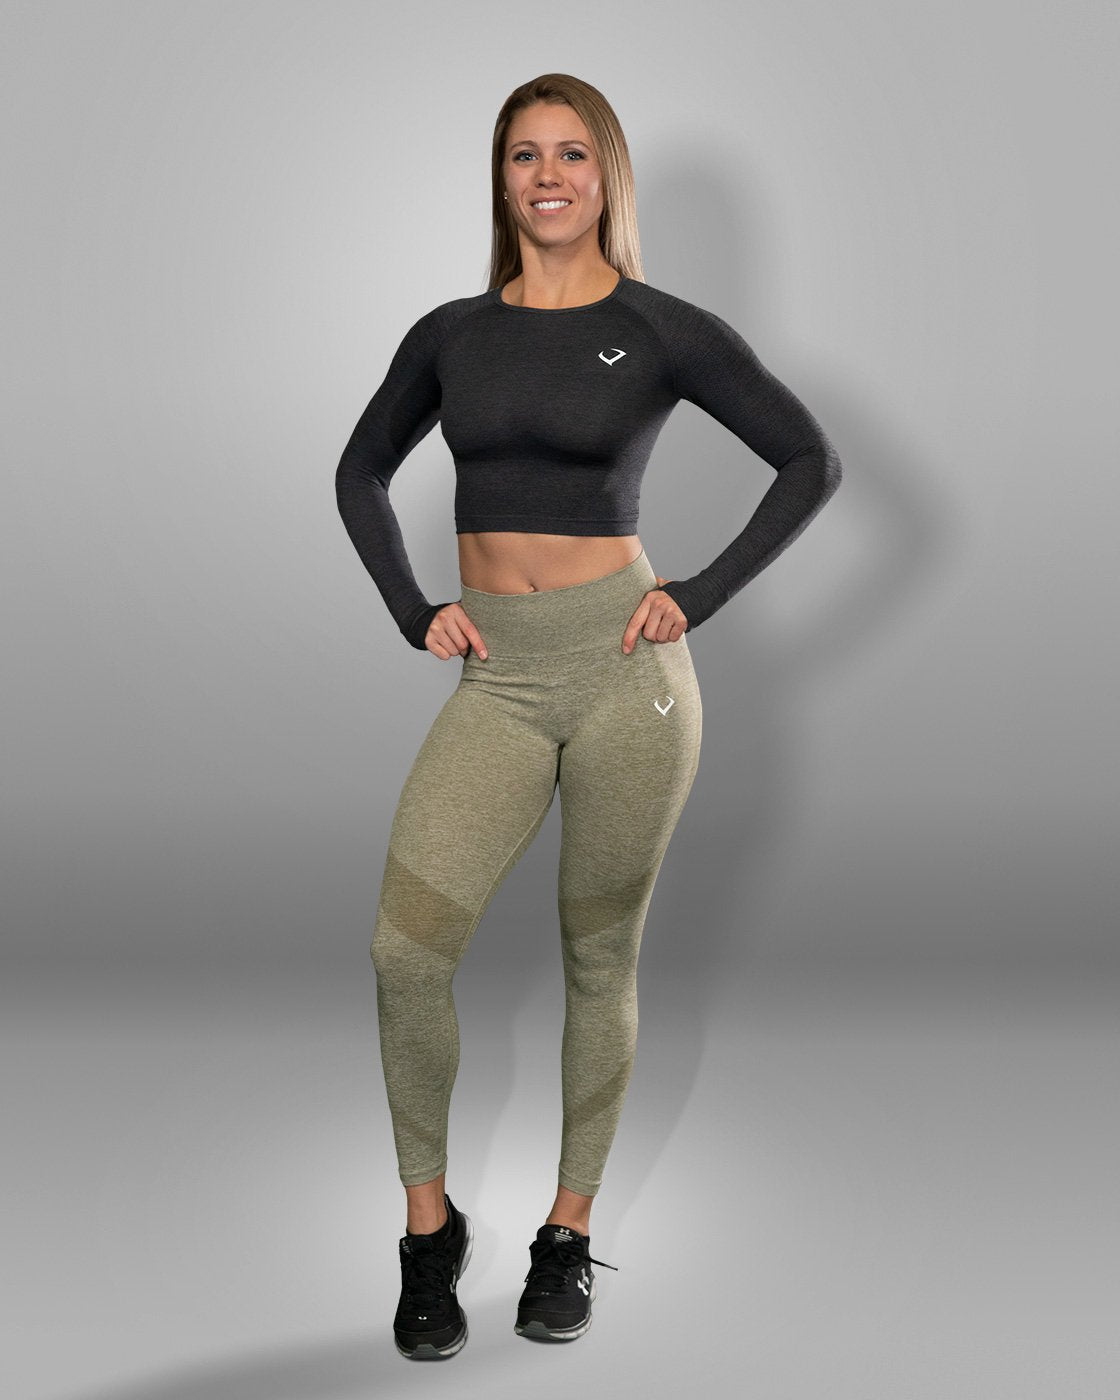 Amore Seamless Olive Leggings – dh9-2-3